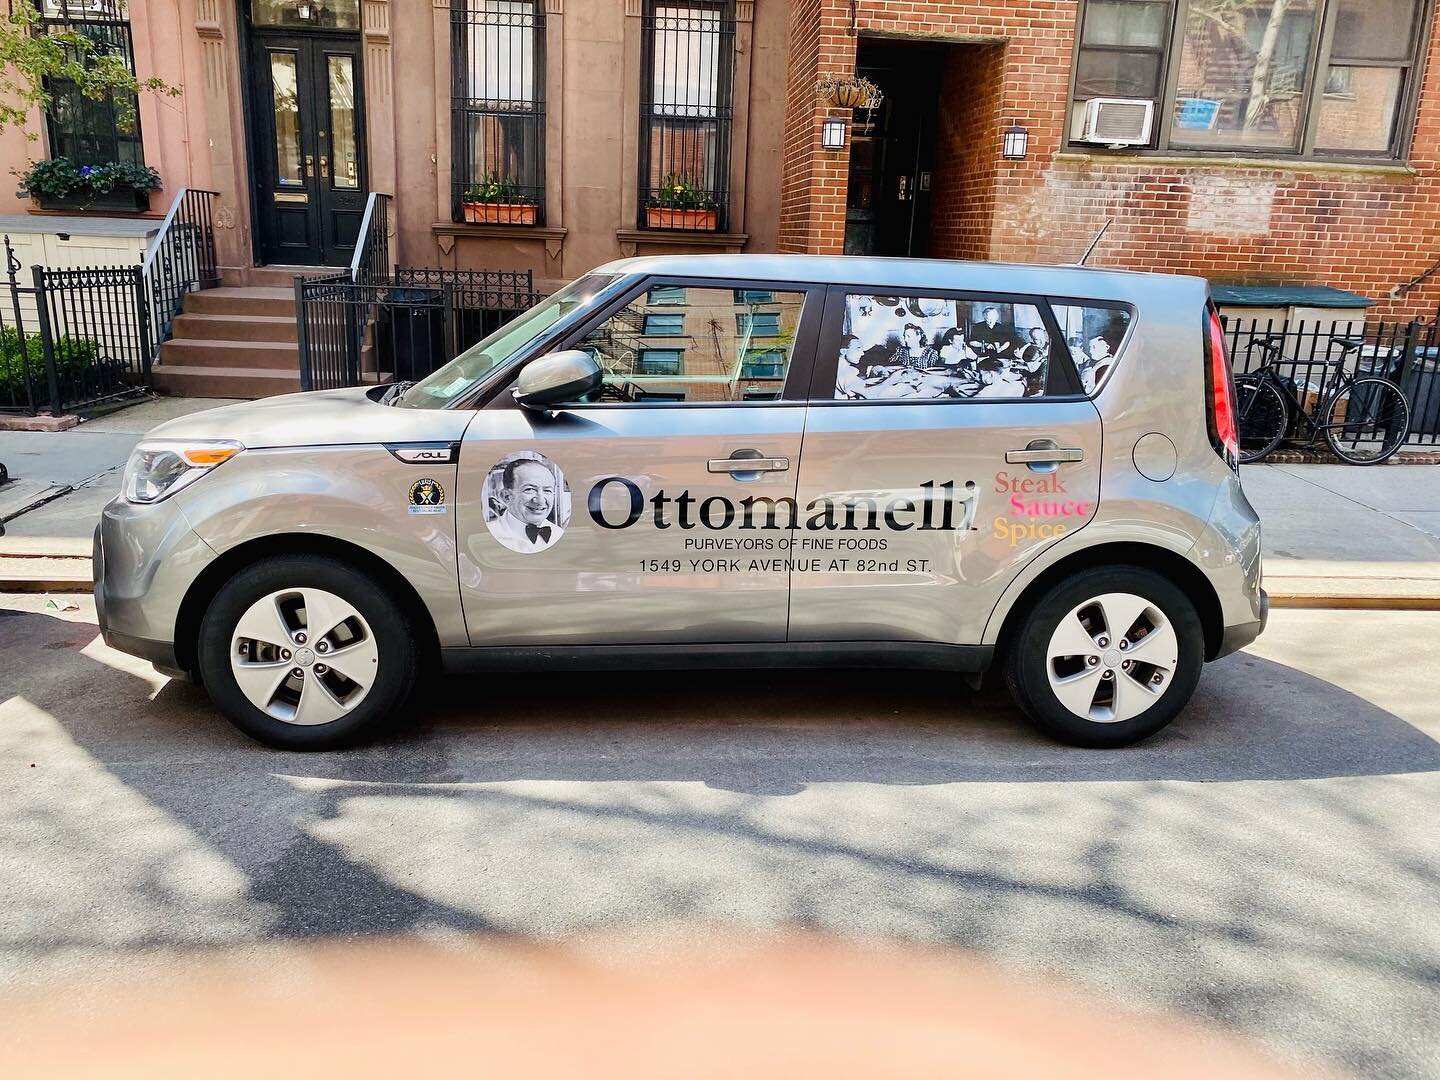 Have you guys seen our new Delivery Van, if you do give us a honk and say hello, loving the detail on the car. Hope you all enjoy the new look ! 
.
.
.
#ottomanellis #ottomanelli #delivery #deliveryservice #newcar #family #nycbutcher #butcher #meats 